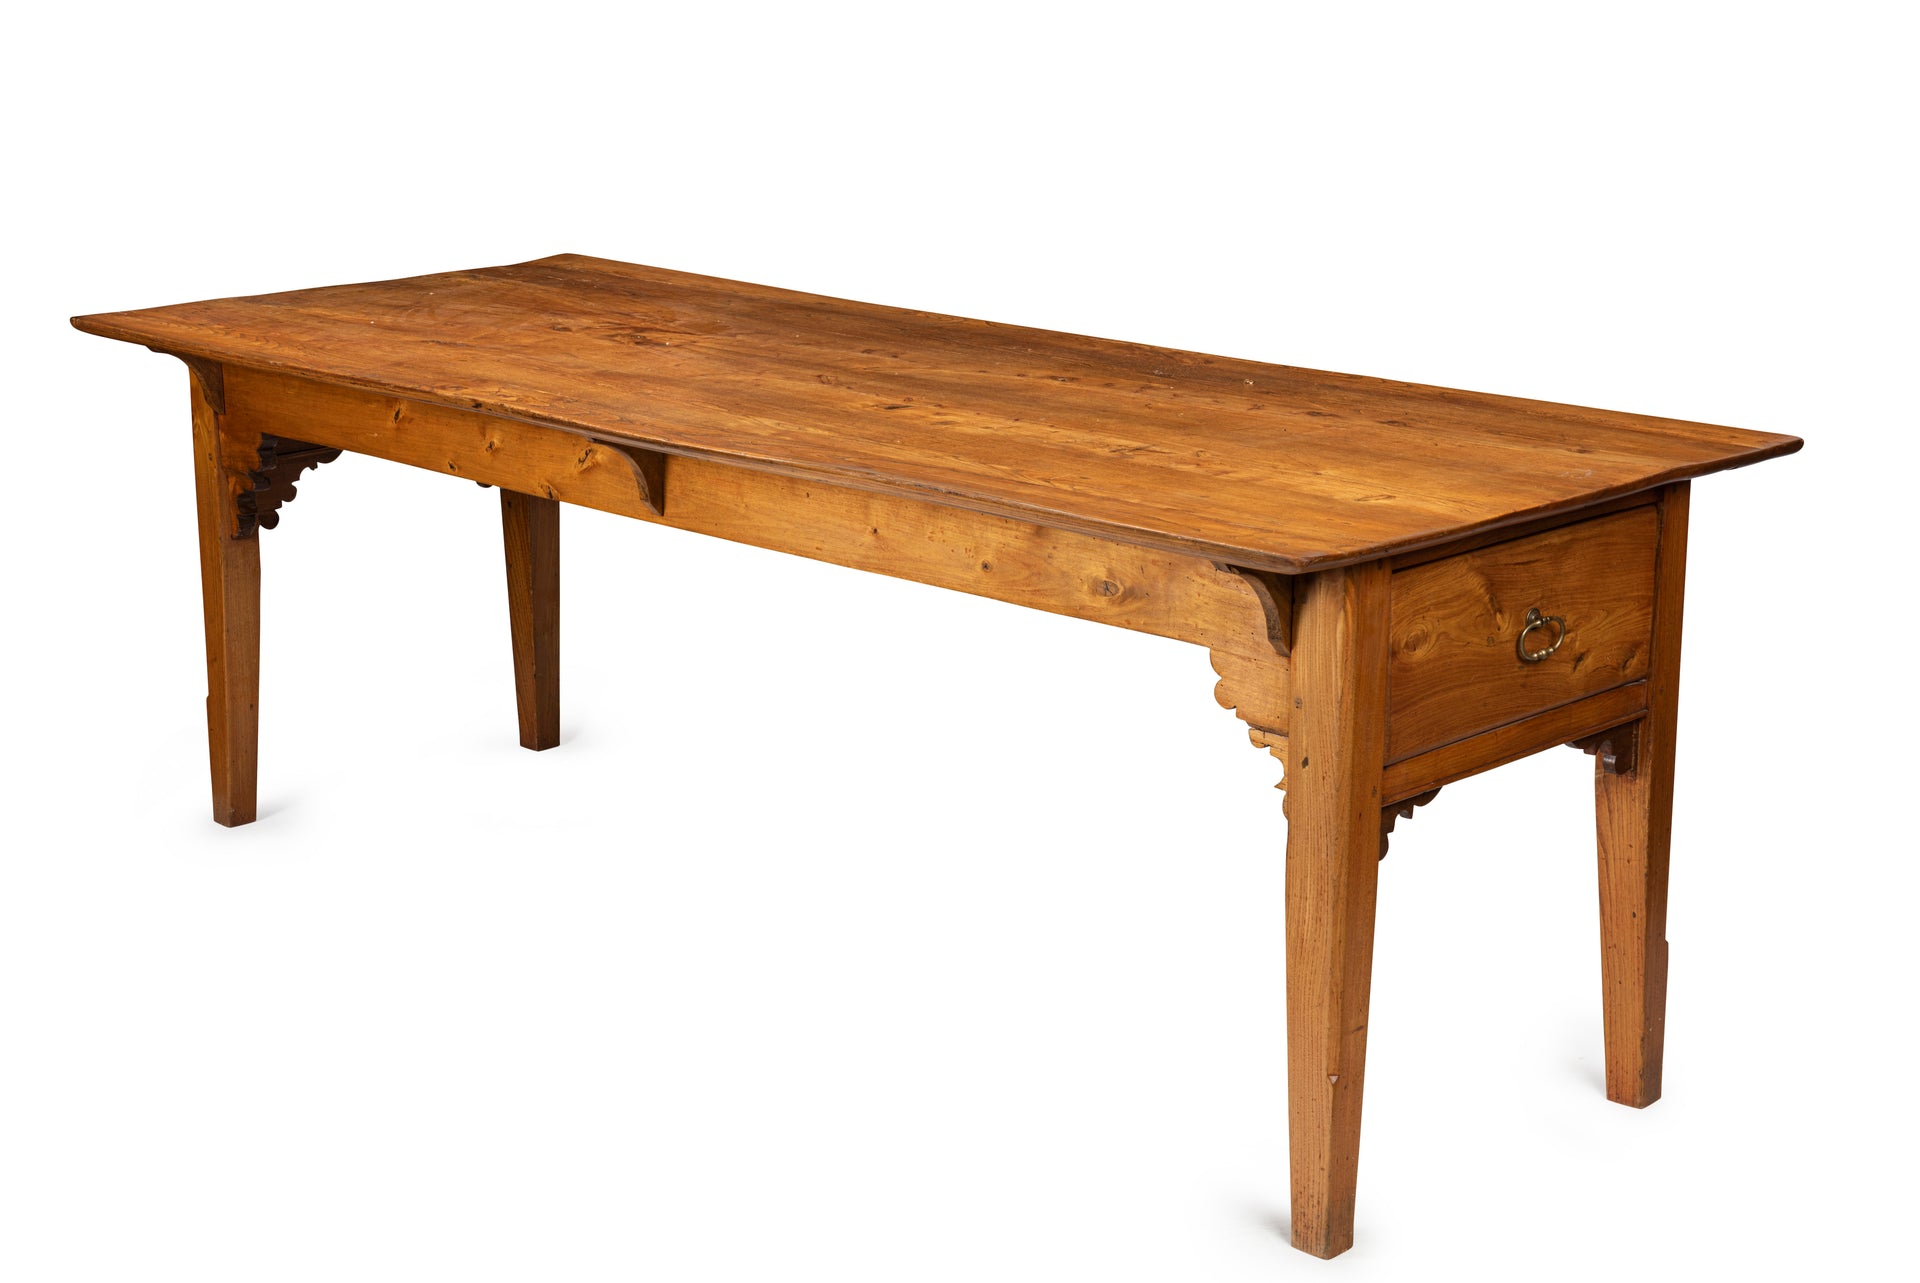 SOLD An outstanding French oak farmhouse table, French Circa 1900